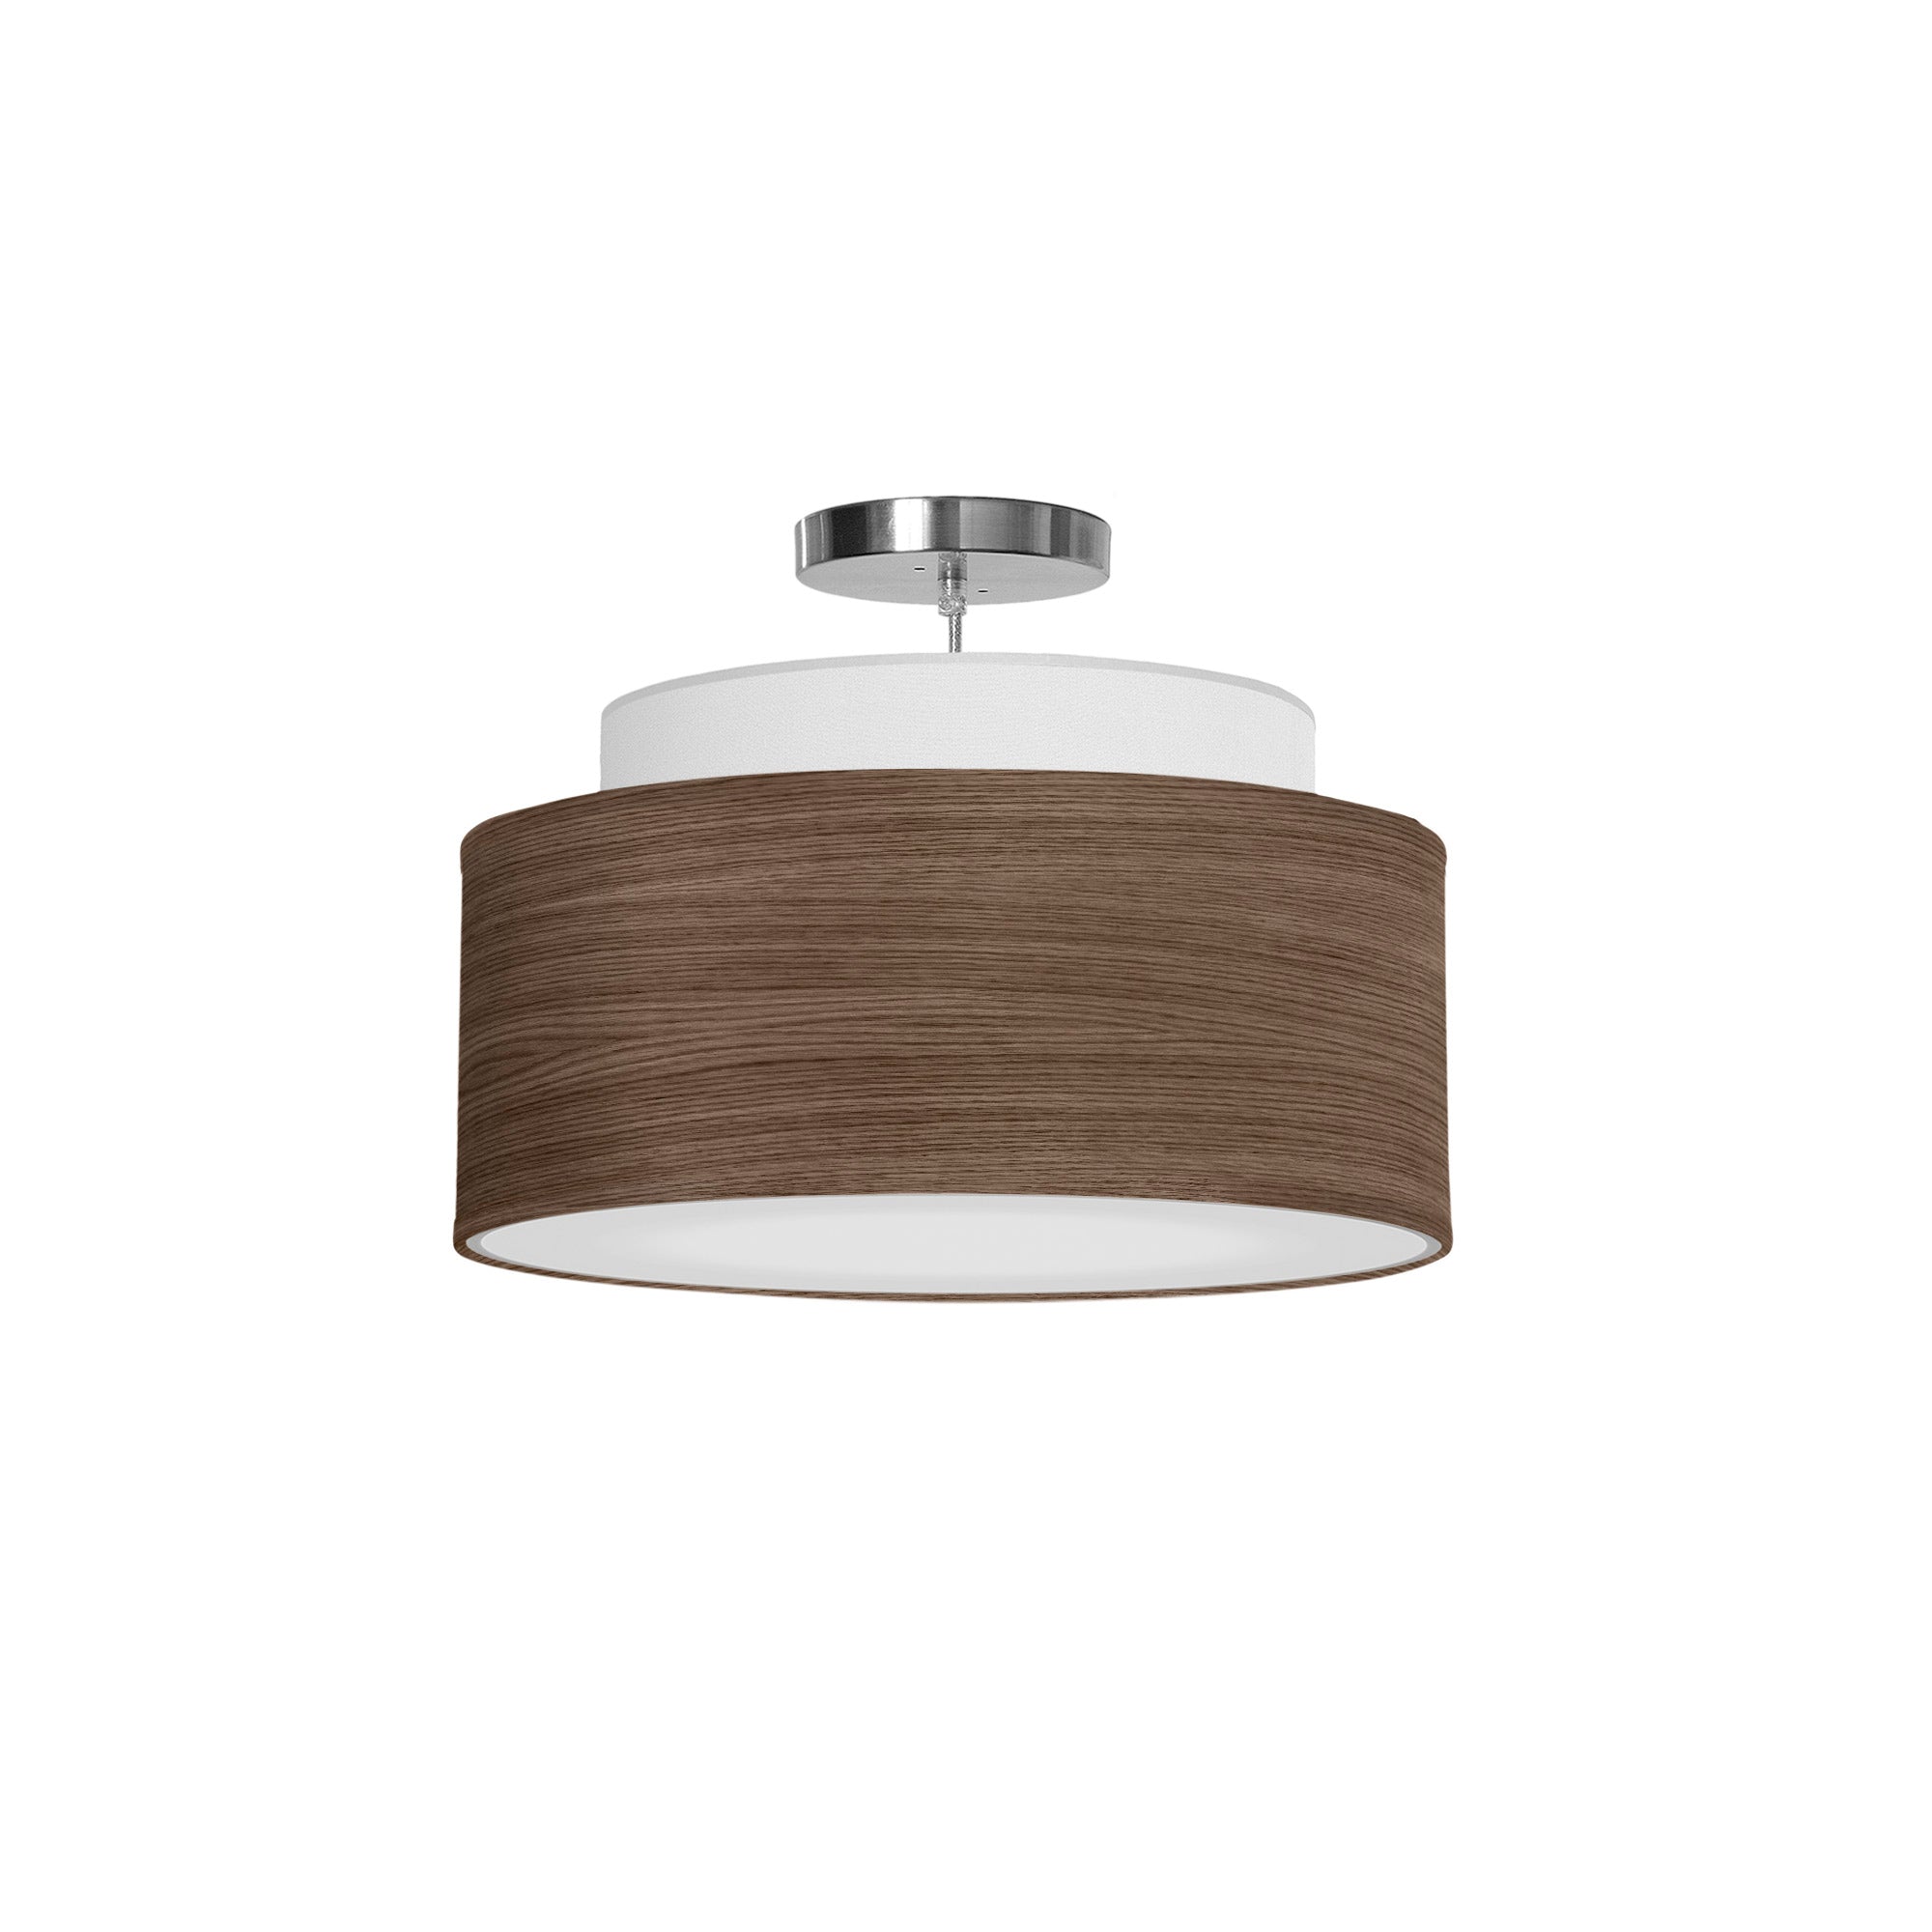 The Elsa Hanging Lamp from Seascape Fixtures with a photo veneer shade in walnut color.